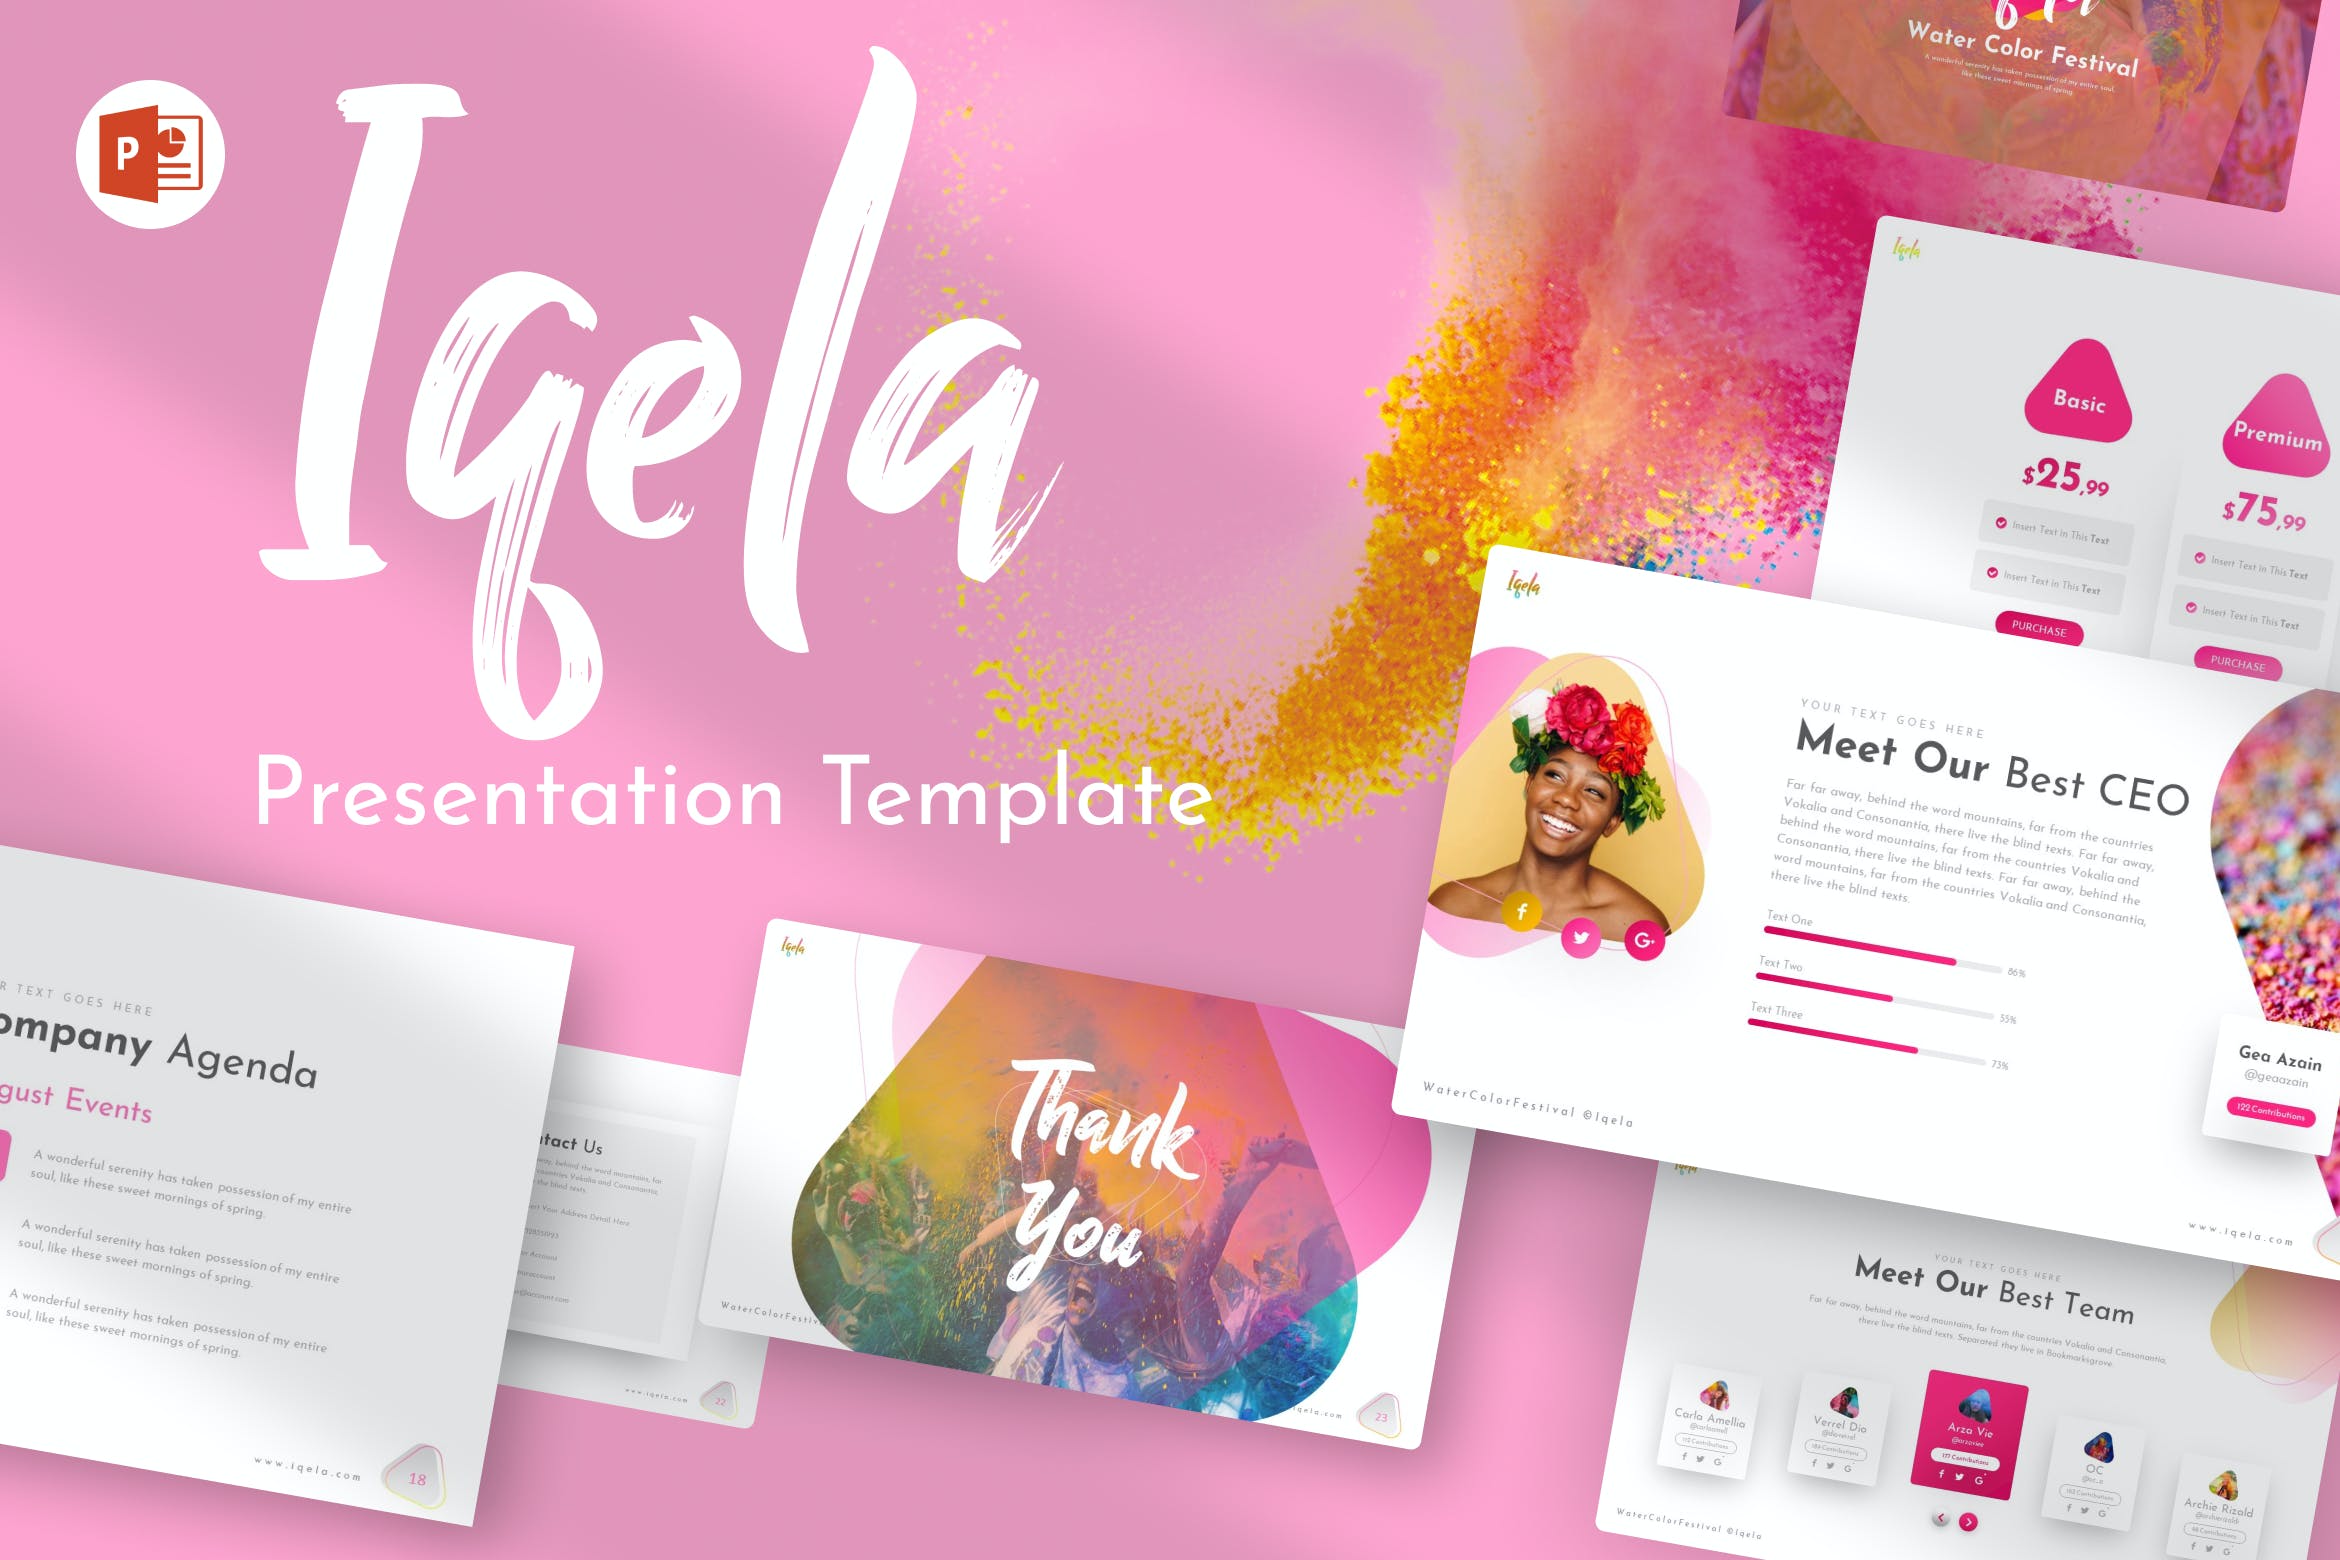 Cover image of Iqela Festival Creative PowerPoint Template.